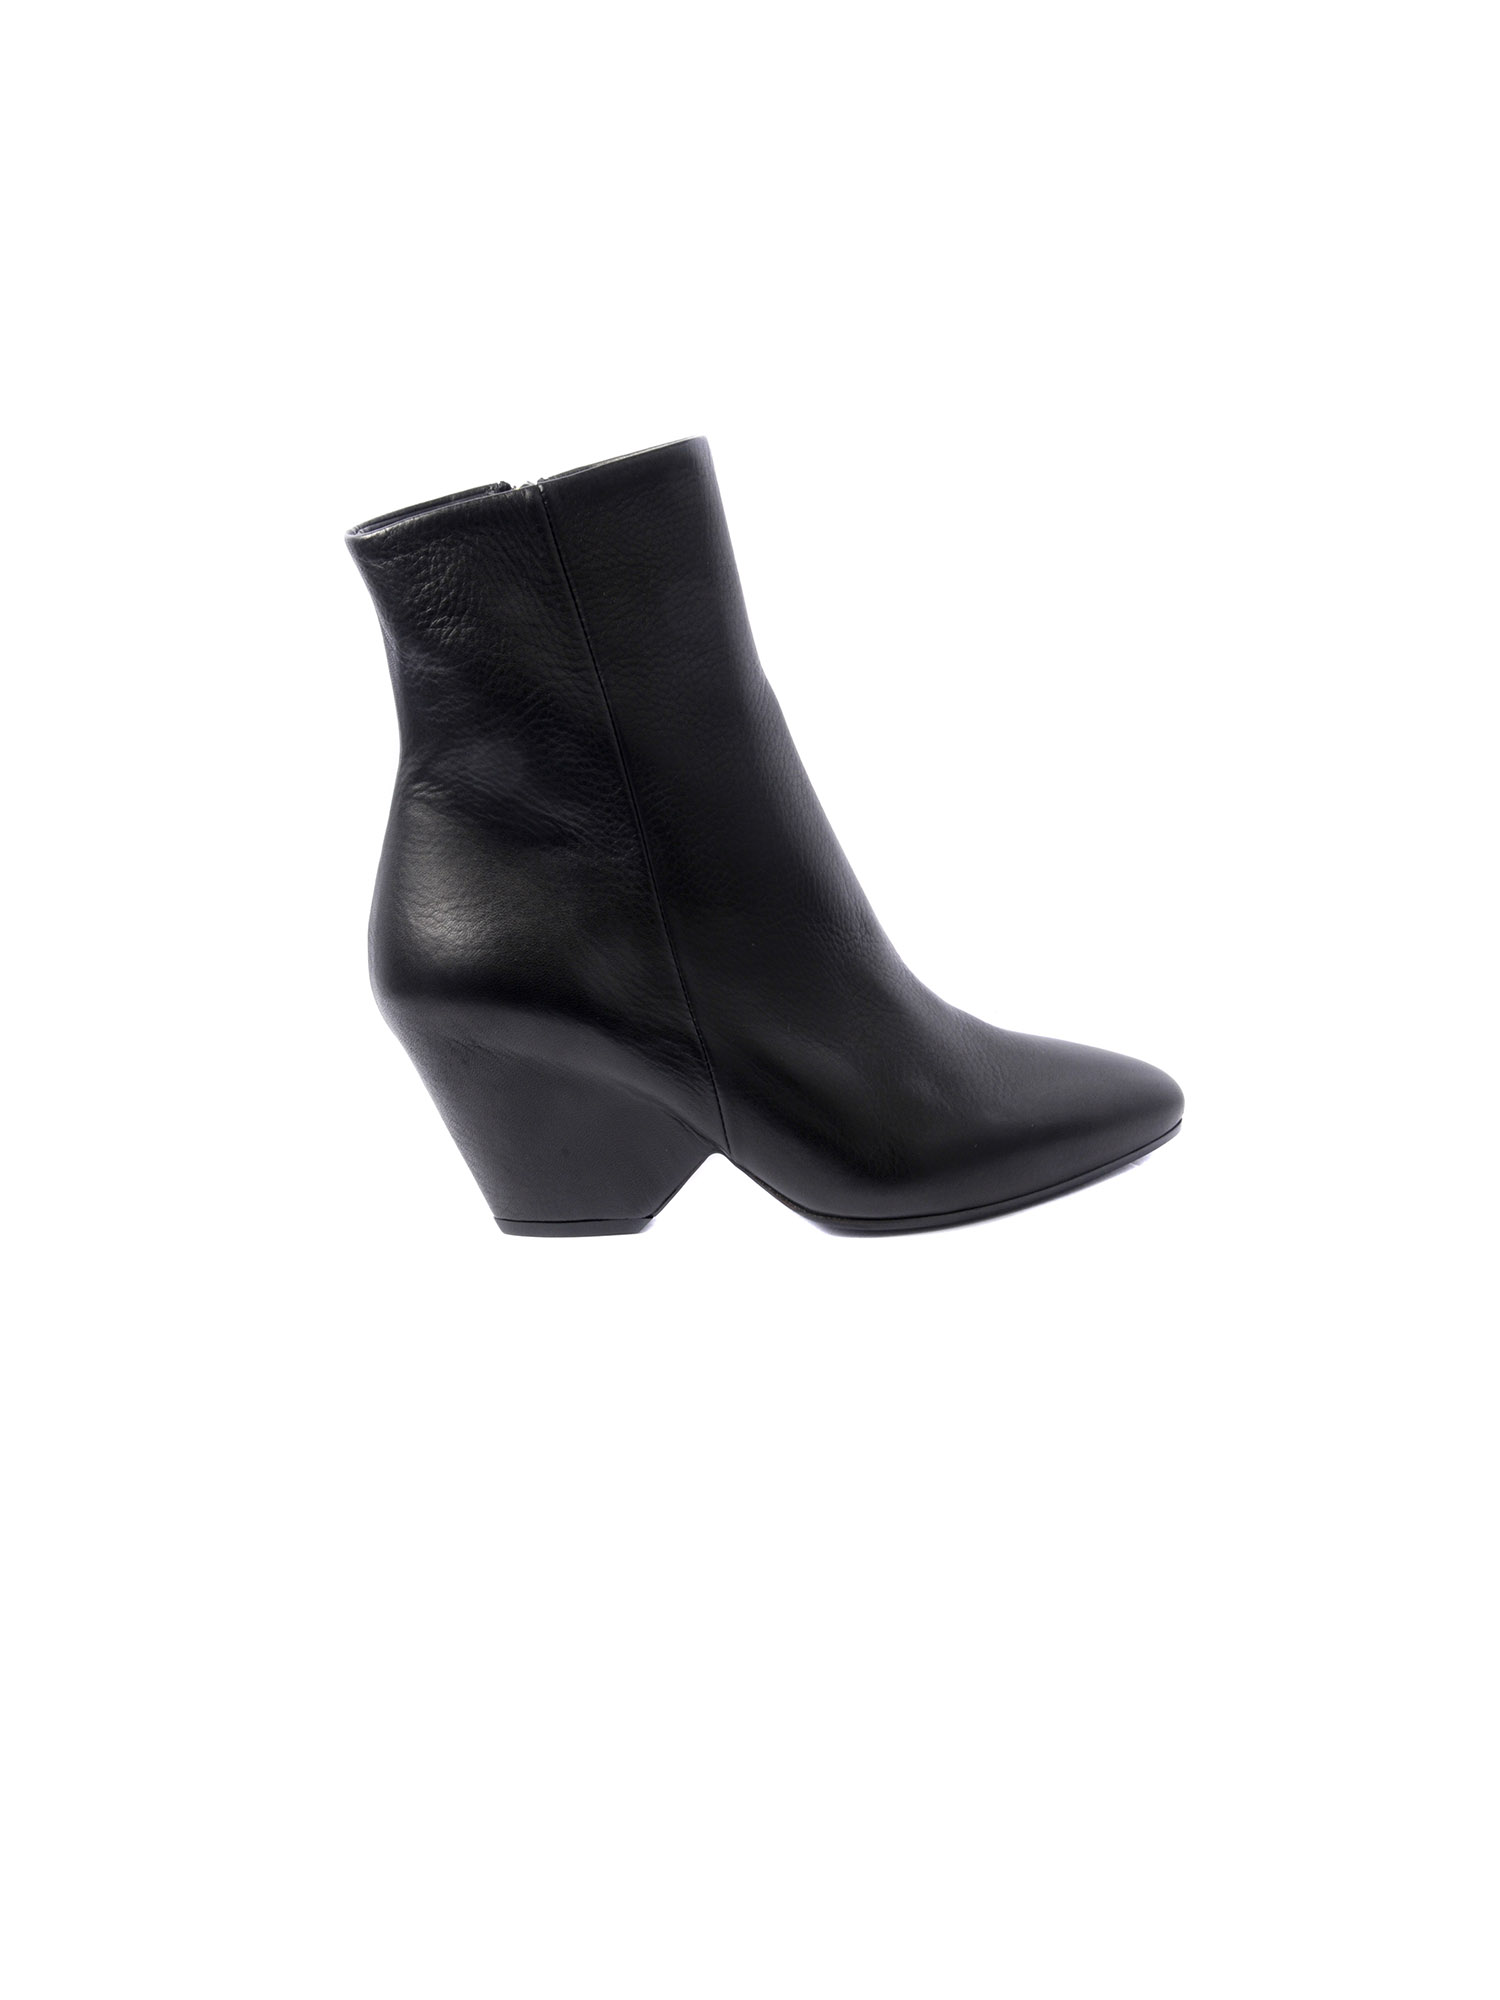 Vic Matie Black Leather Ankle Boots with Shell-Shaped Heel - HauteFootwear